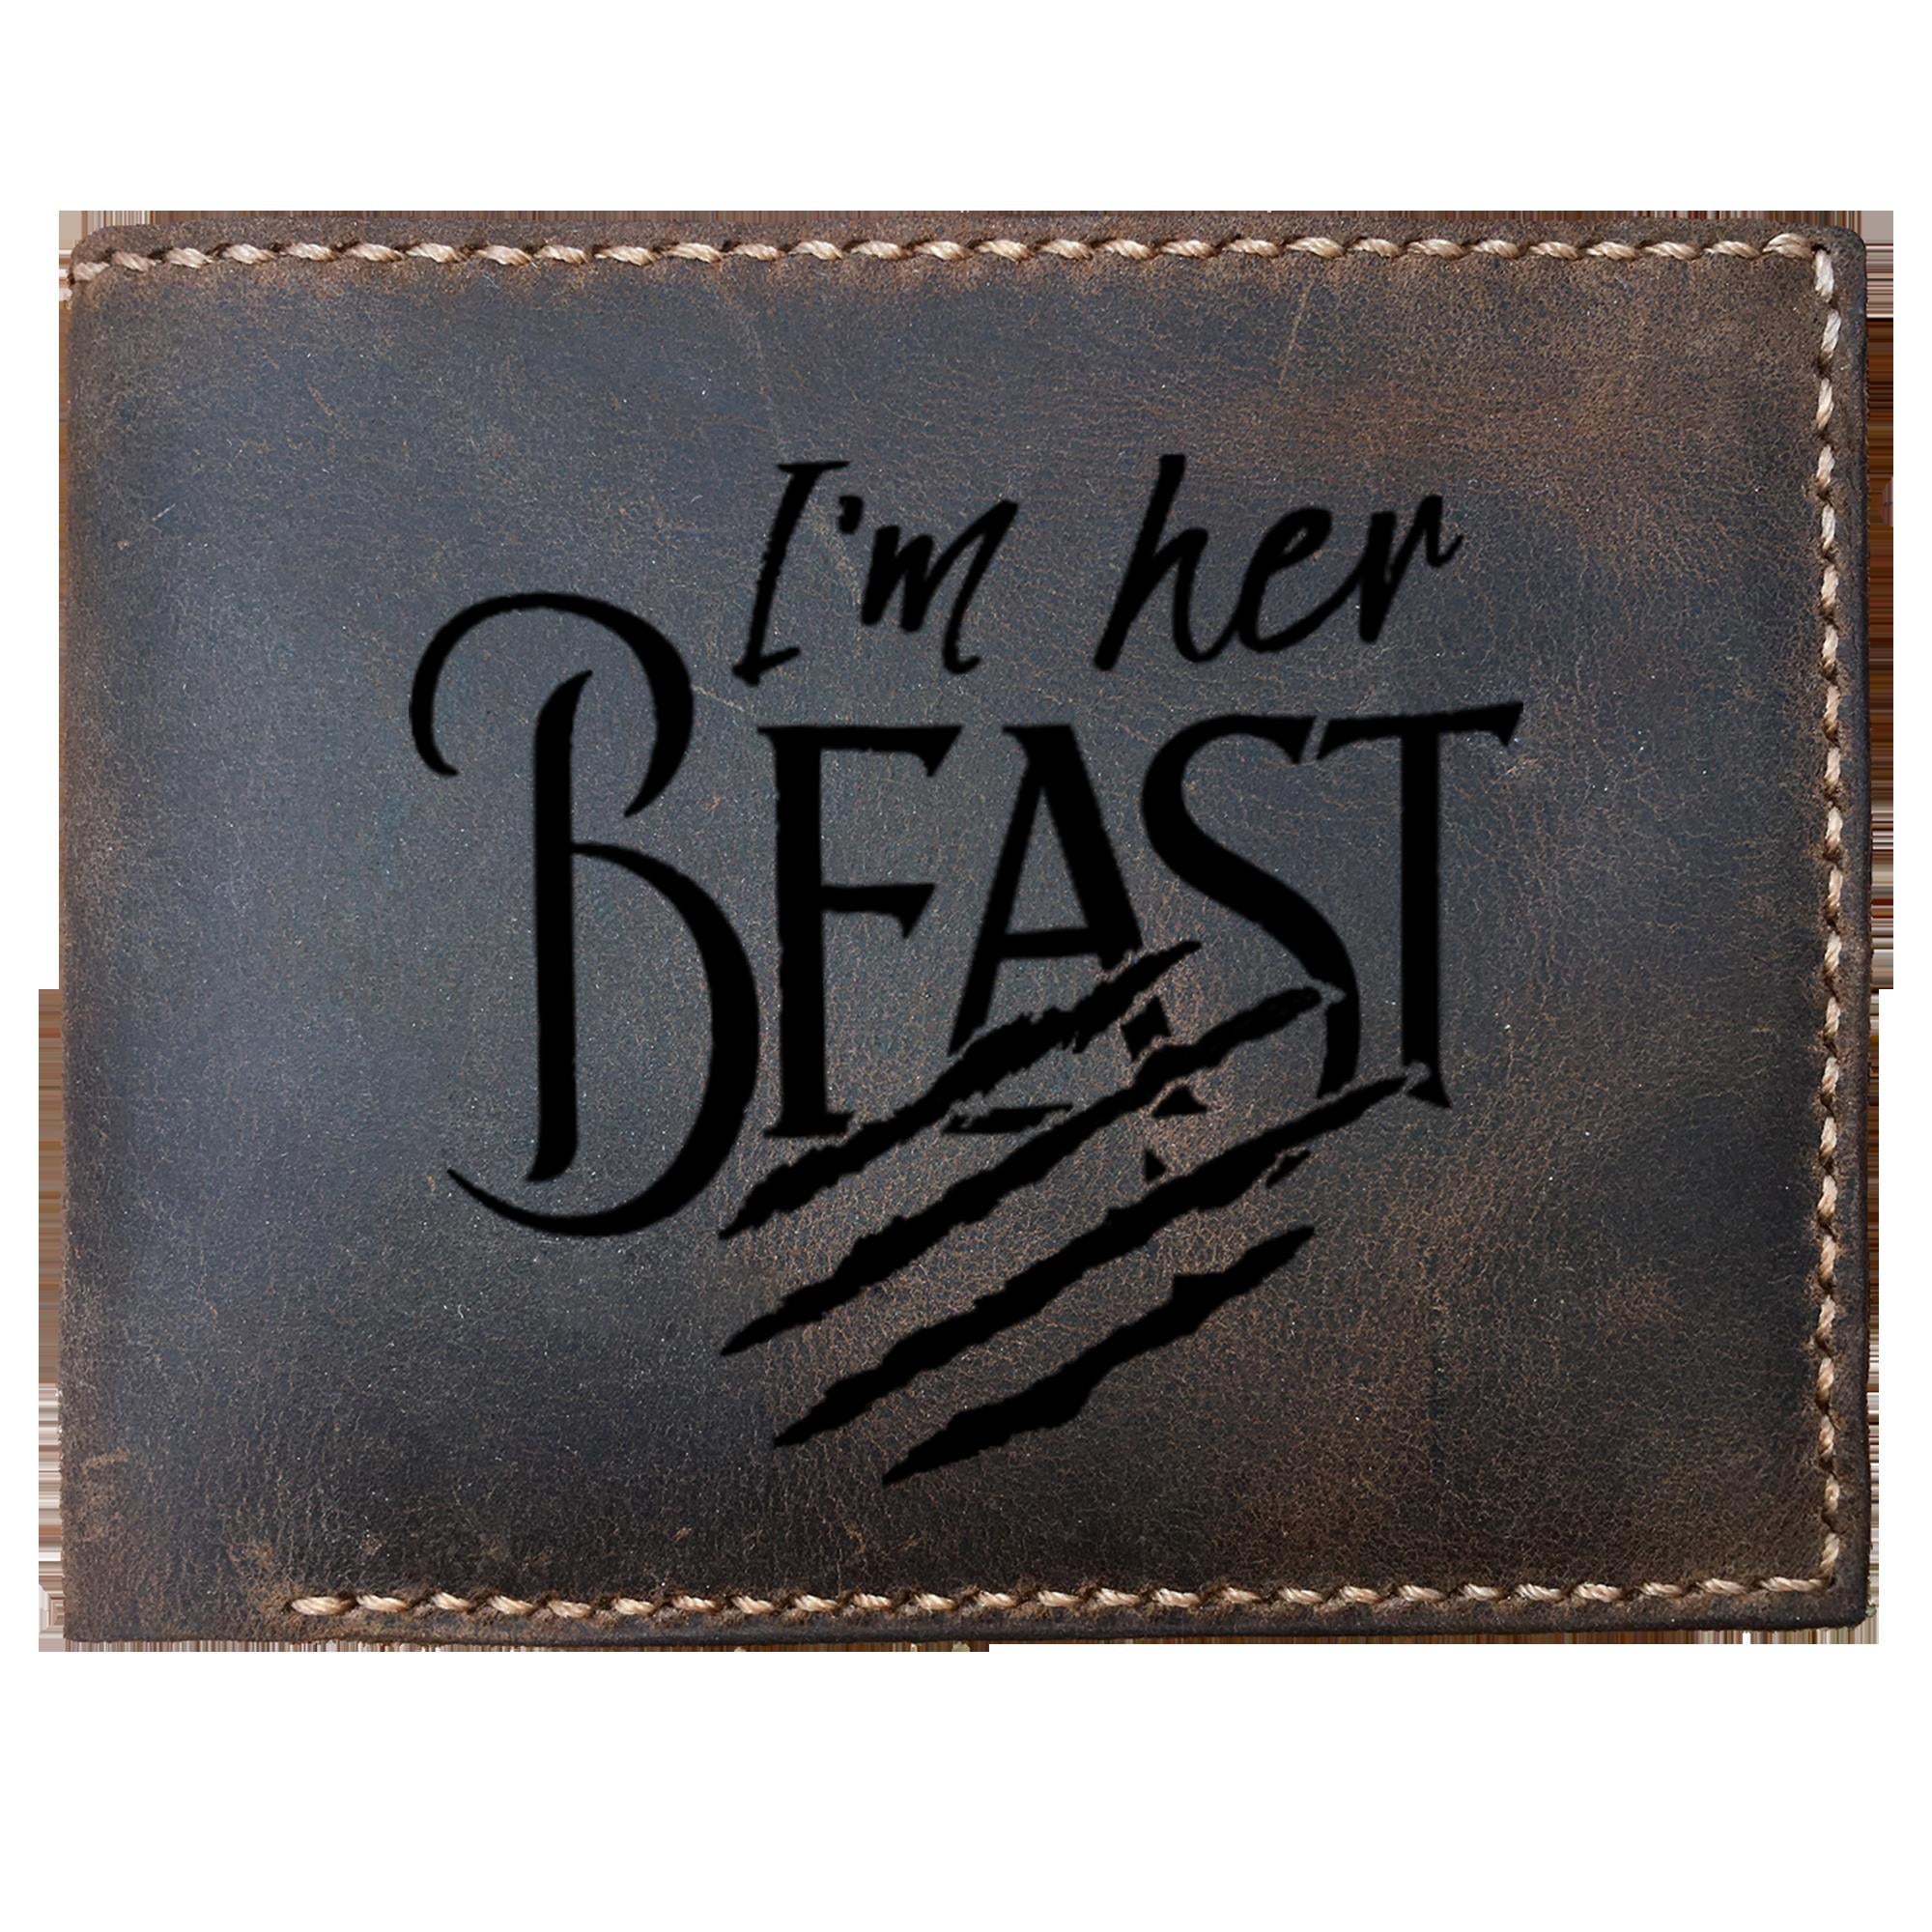 Skitongifts Funny Custom Laser Engraved Bifold Leather Wallet For Men, Her Beast Funny Humorous And Cute Couple With Couples